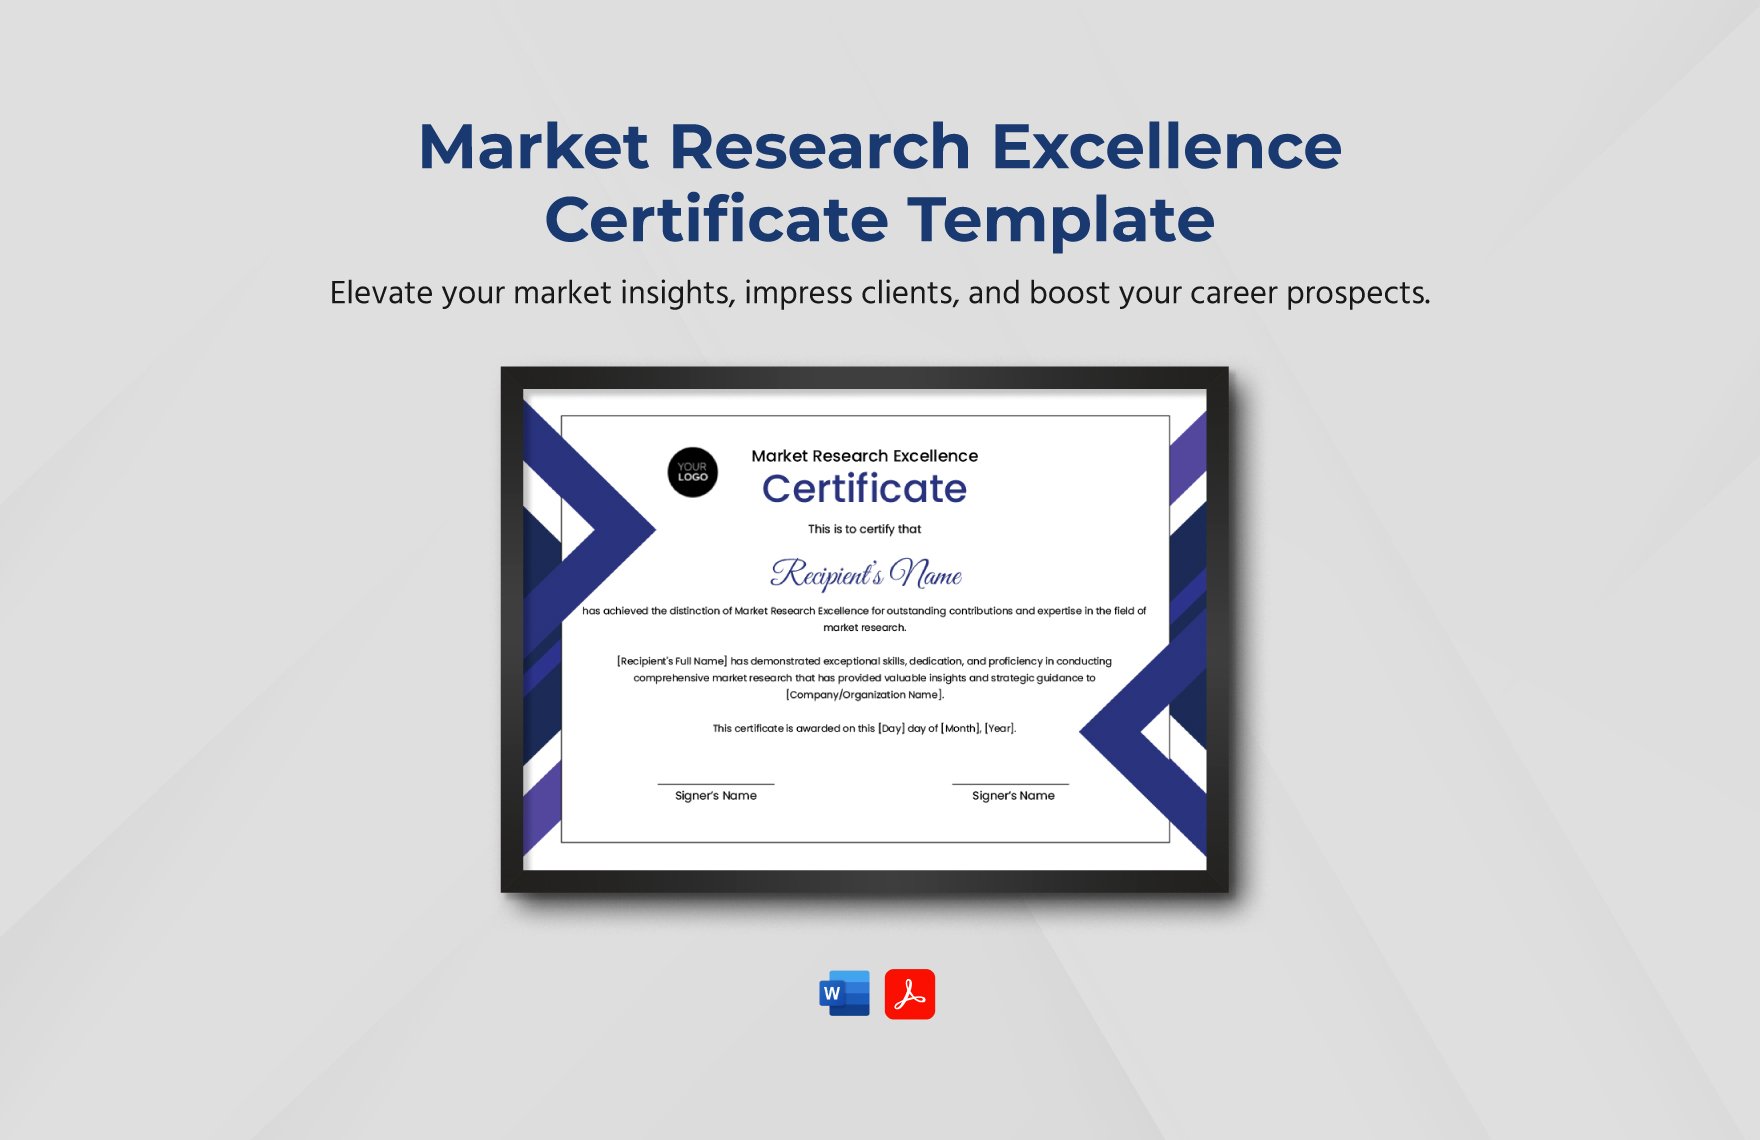 Market Research Excellence Certificate Template